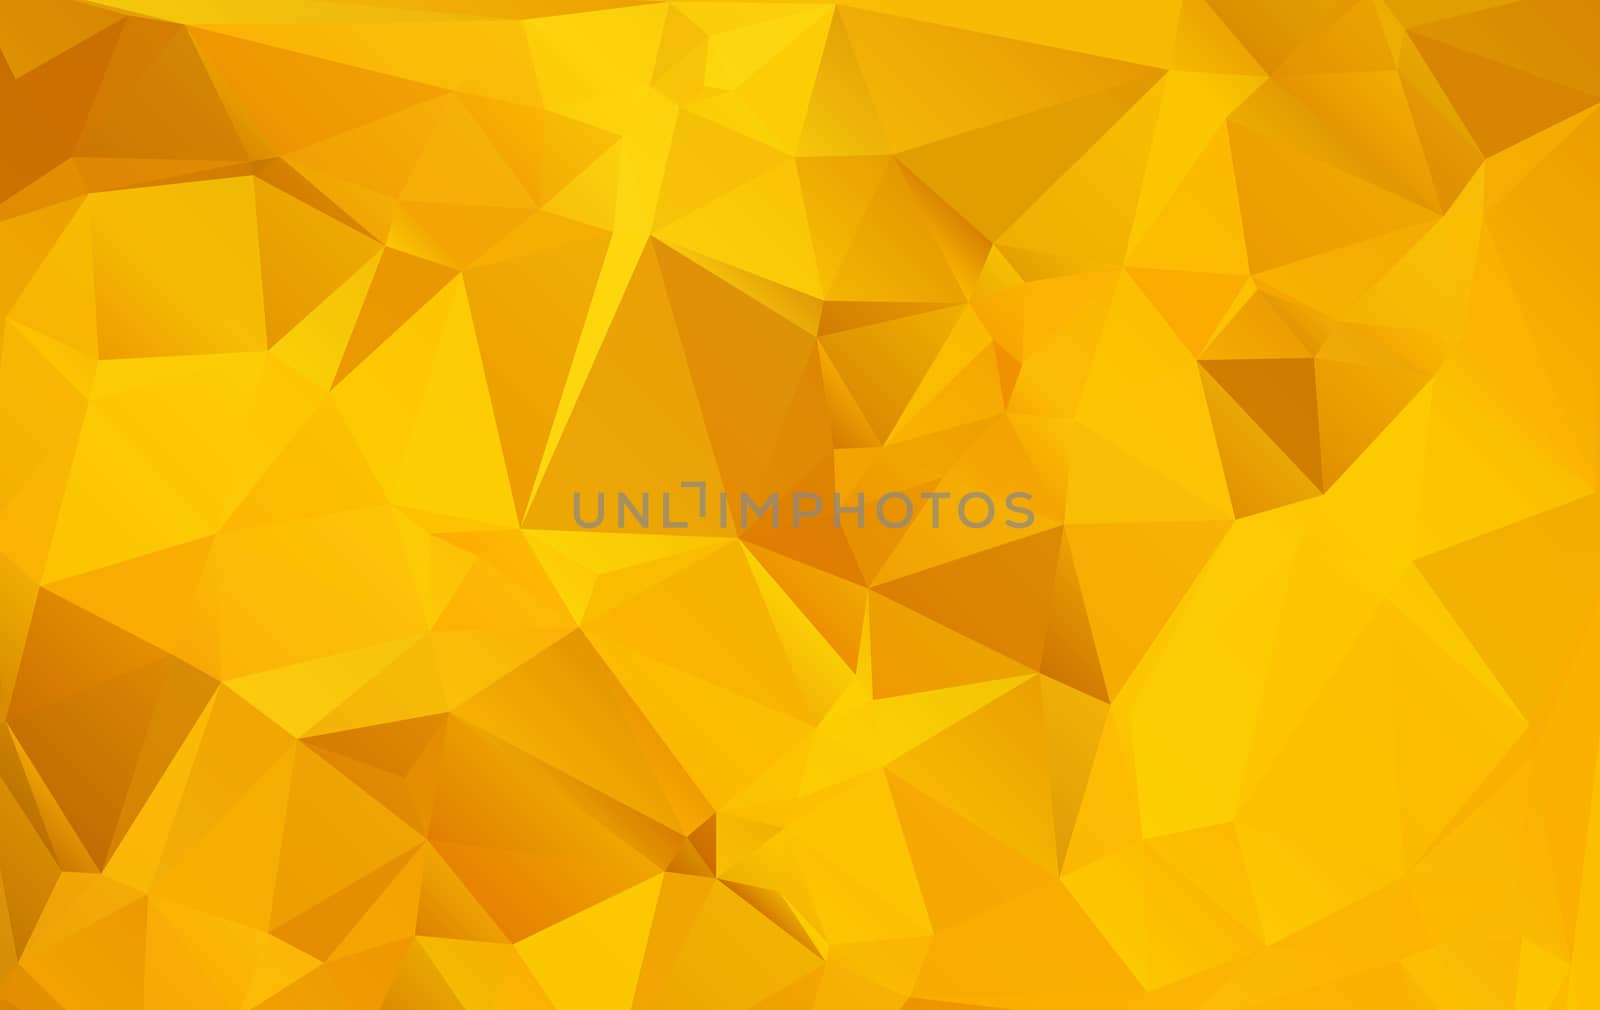 Abstract polygonal background by ires007